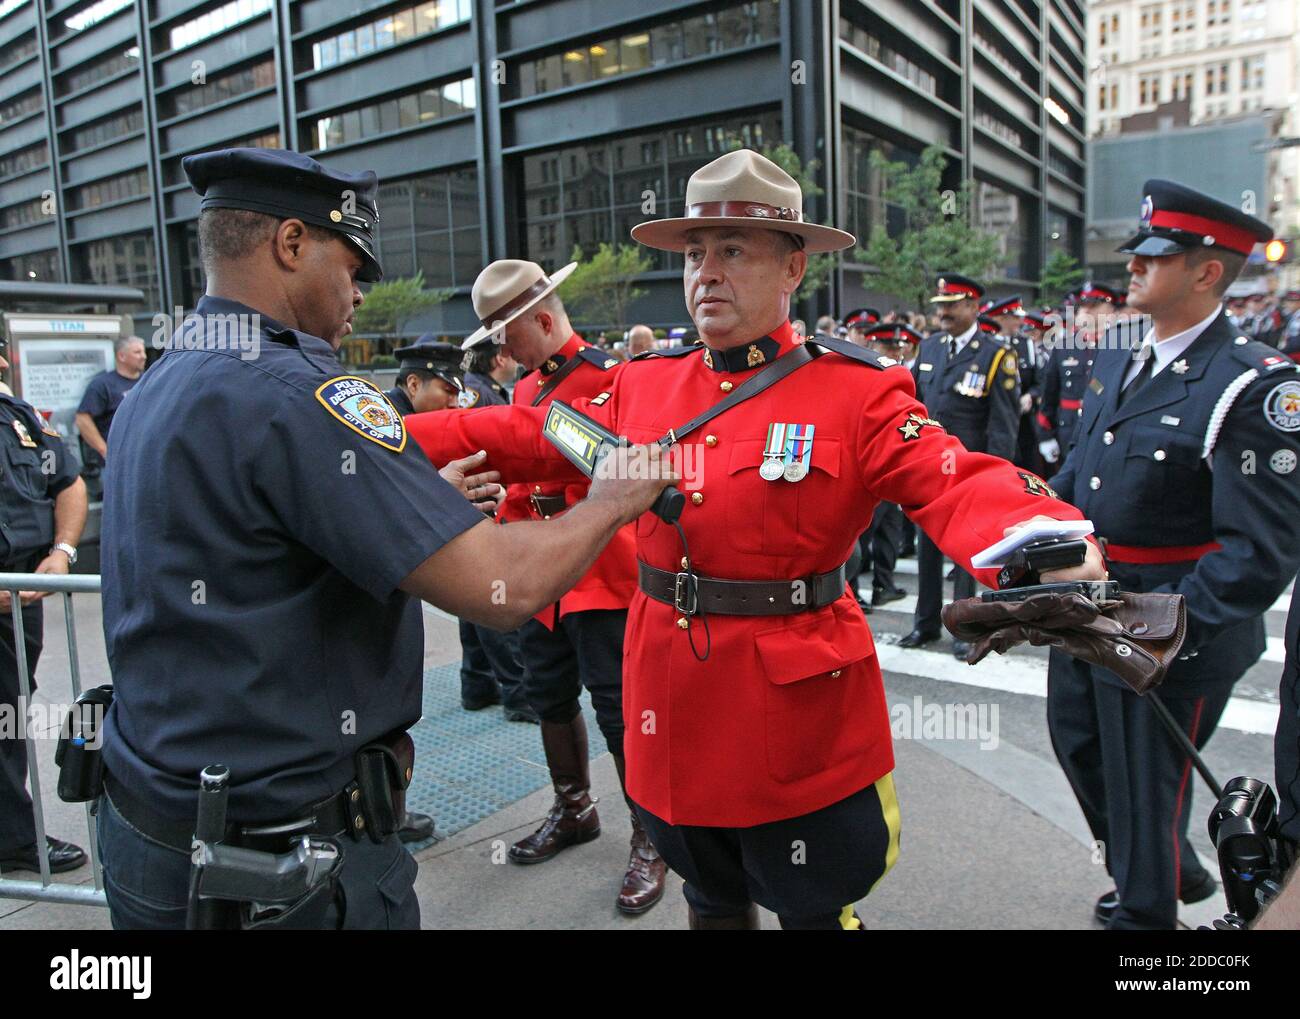 NO FILM, NO VIDEO, NO TV, NO DOCUMENTARY - Corporal David Herard of the Royal Canadian Mount Police is wanded at the security checkpoint at Liberty Park as he and the entire Police contingent from Canada wait to be wanded to pass through security for the 9/11 memorial service in New York City, New York, Sunday, September 11, 2011. Photo by Michael Bryant/Philadelphia Inquirer/MCT/ABACAPRESS.COM Stock Photo